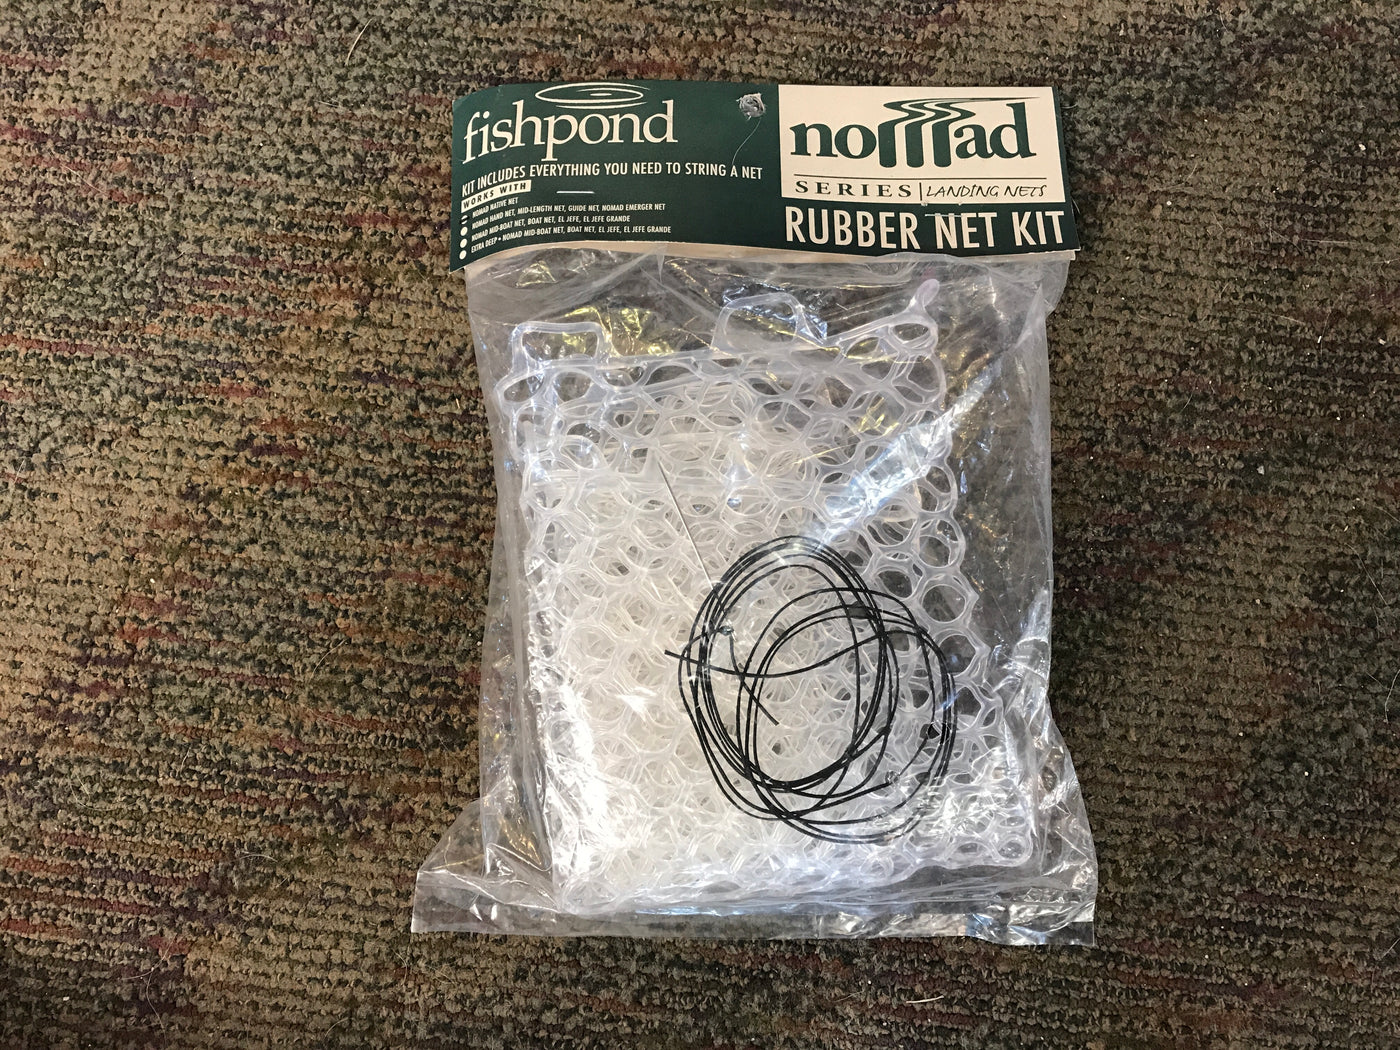 Fishpond Replacement Rubber Net Kit